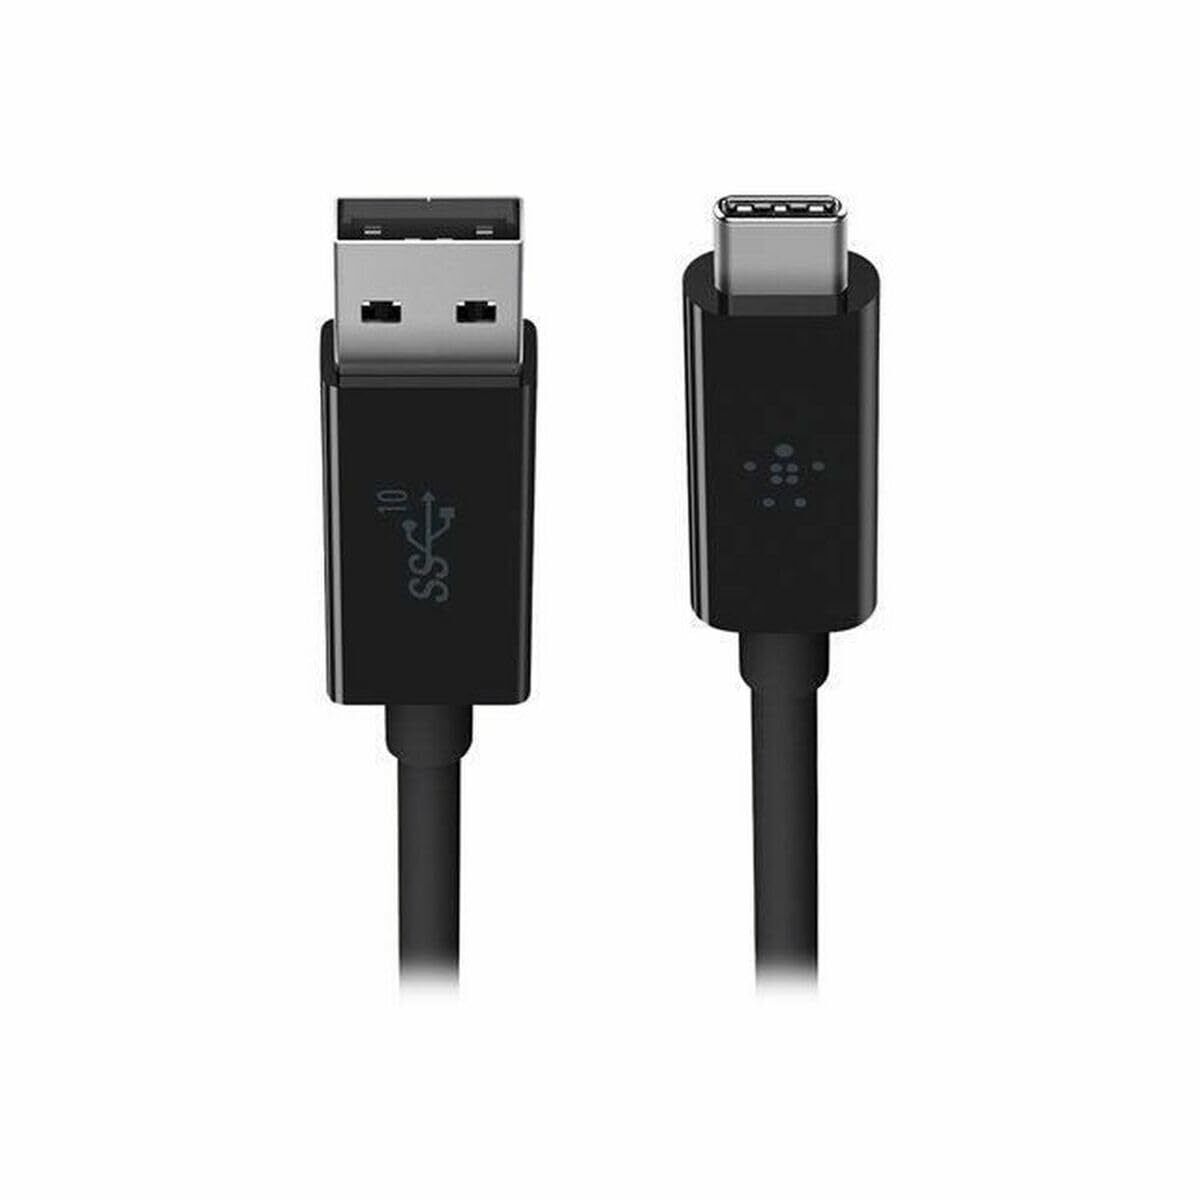 Belkin 3.1 USB A To USB C Cable Compatible W/ Thunderbolt 3 - USB C Cable 3 feet